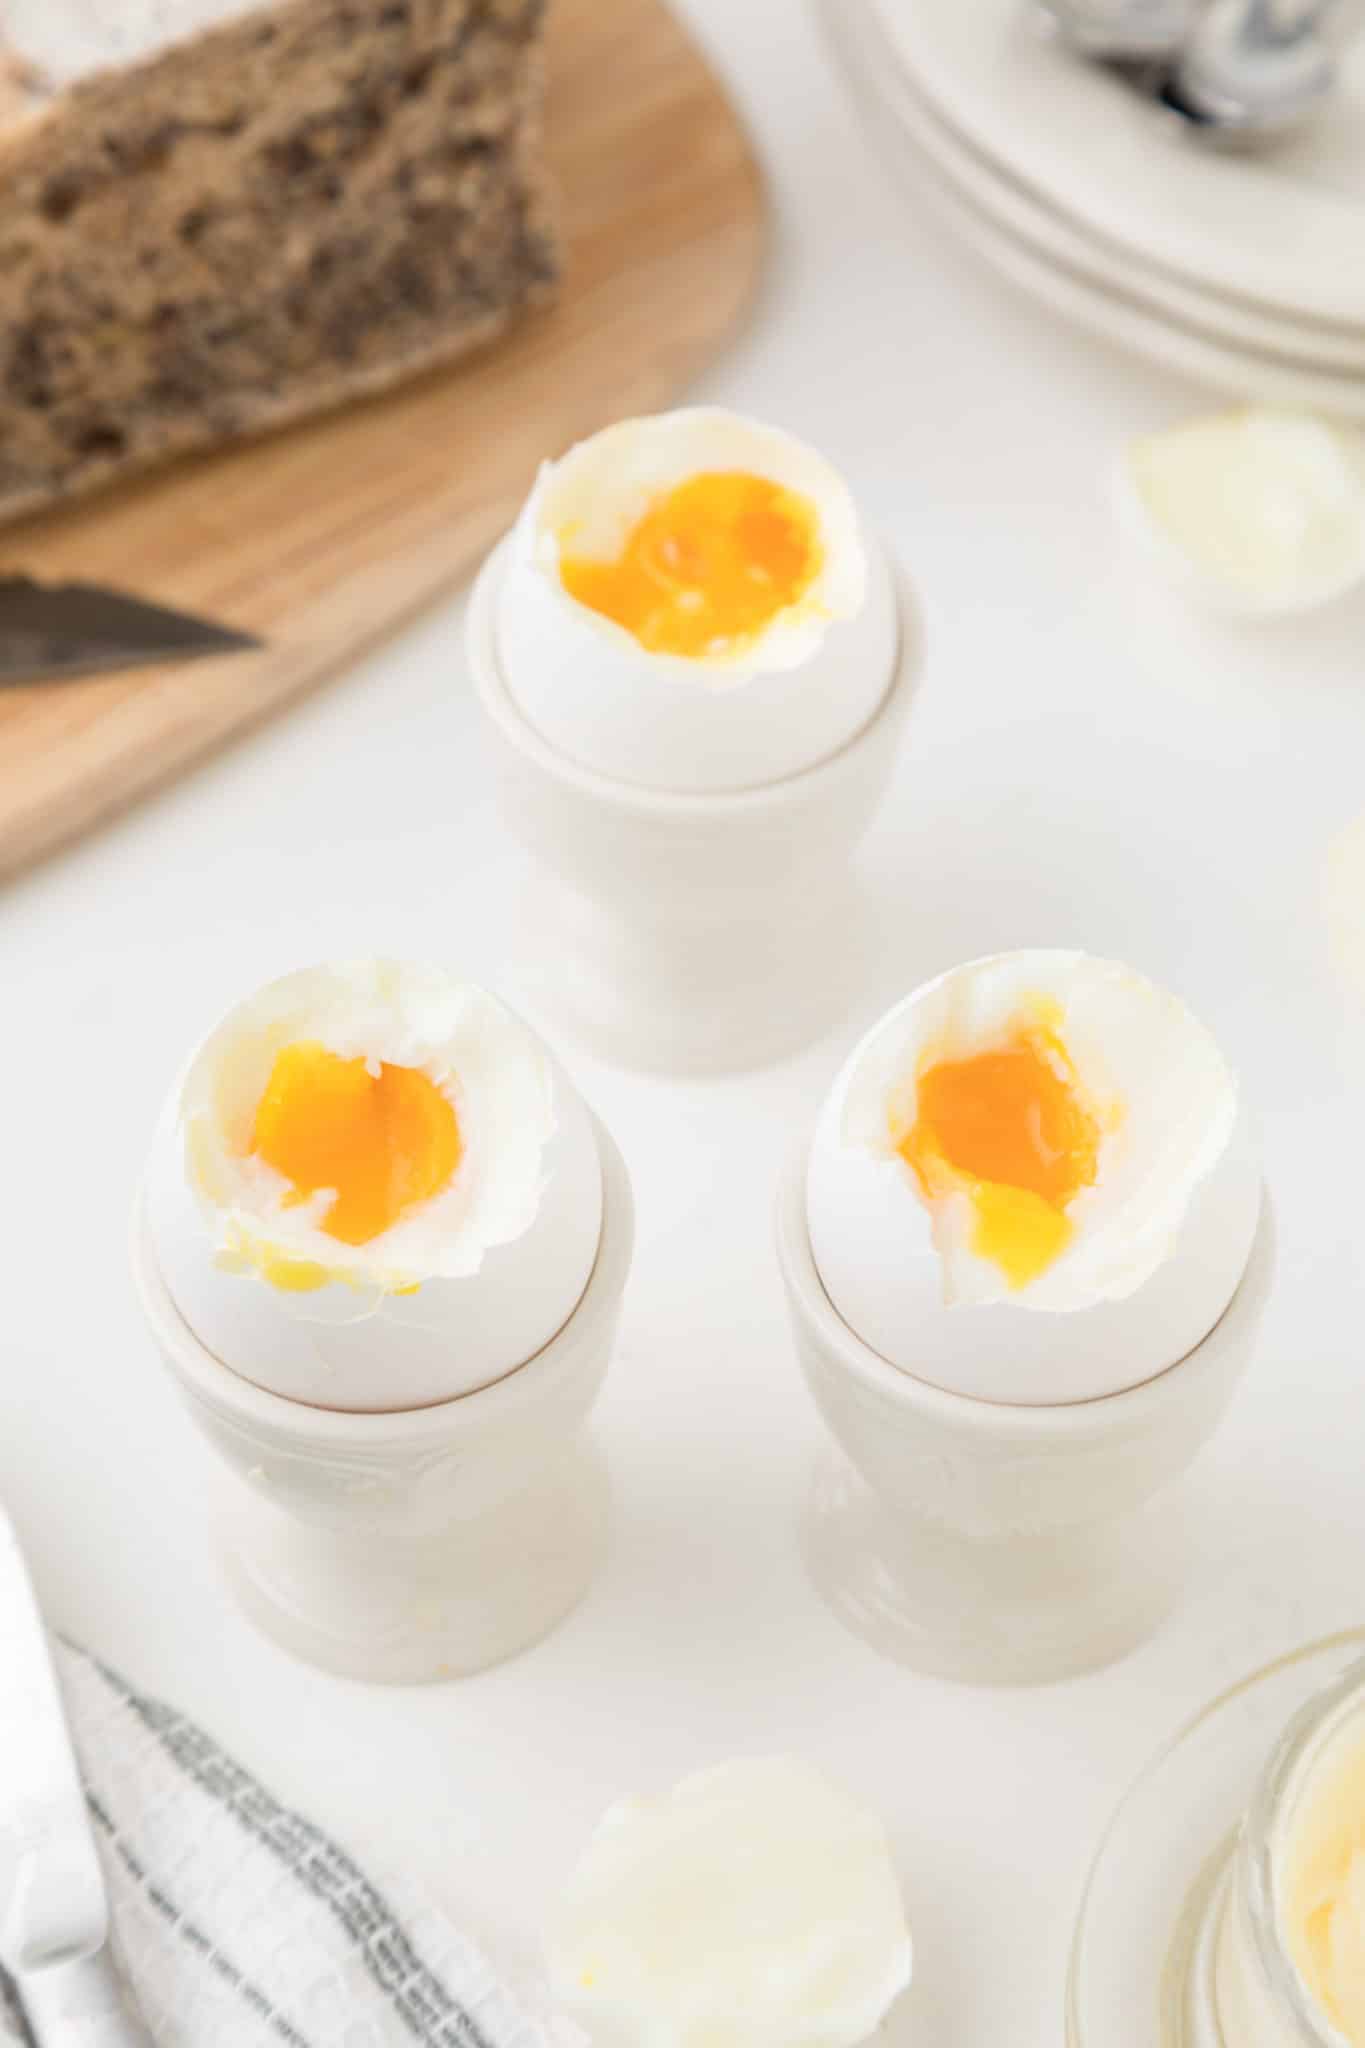 soft boiled eggs served in egg cups